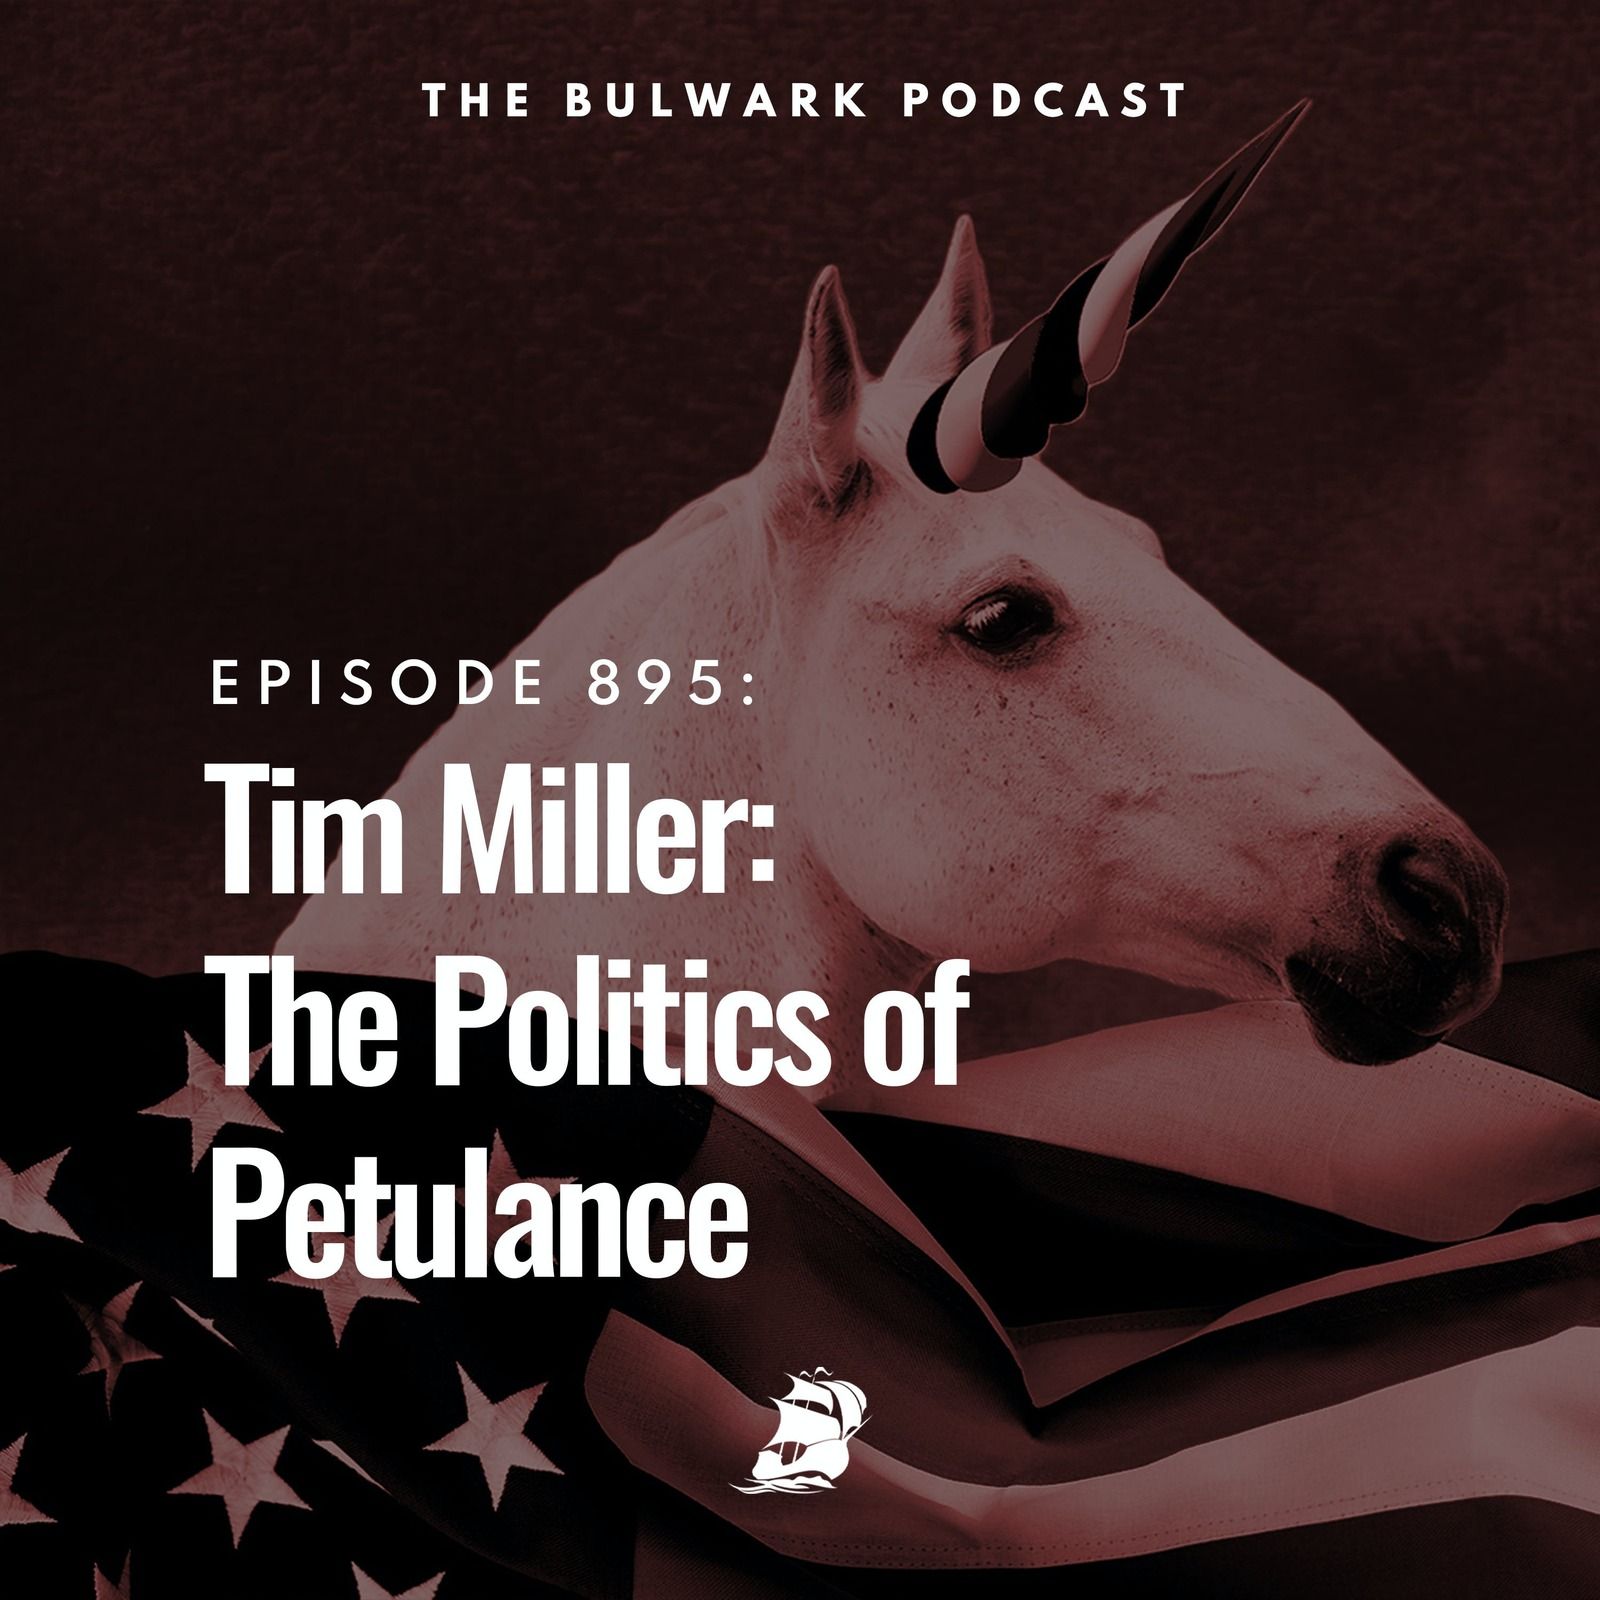 Tim Miller: The Politics of Petulance by The Bulwark Podcast